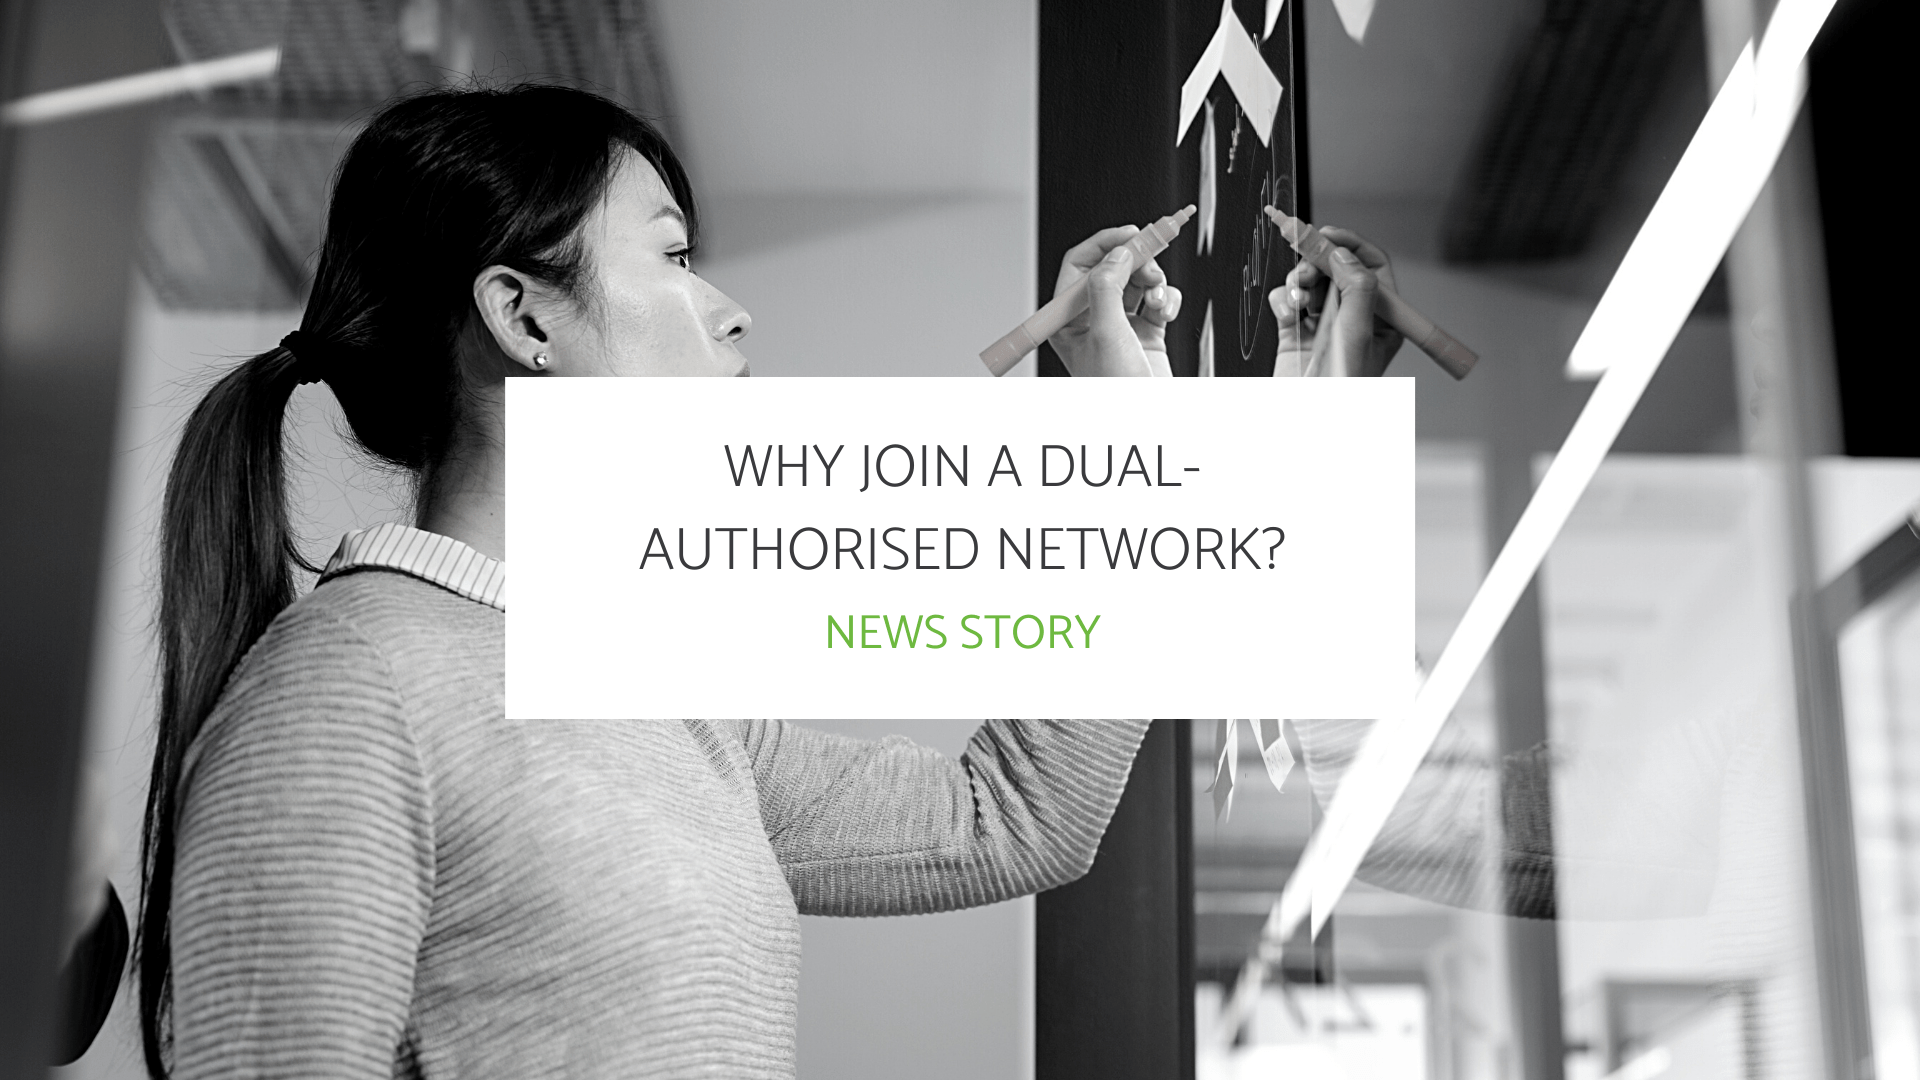 Why join a dual-authorised network?